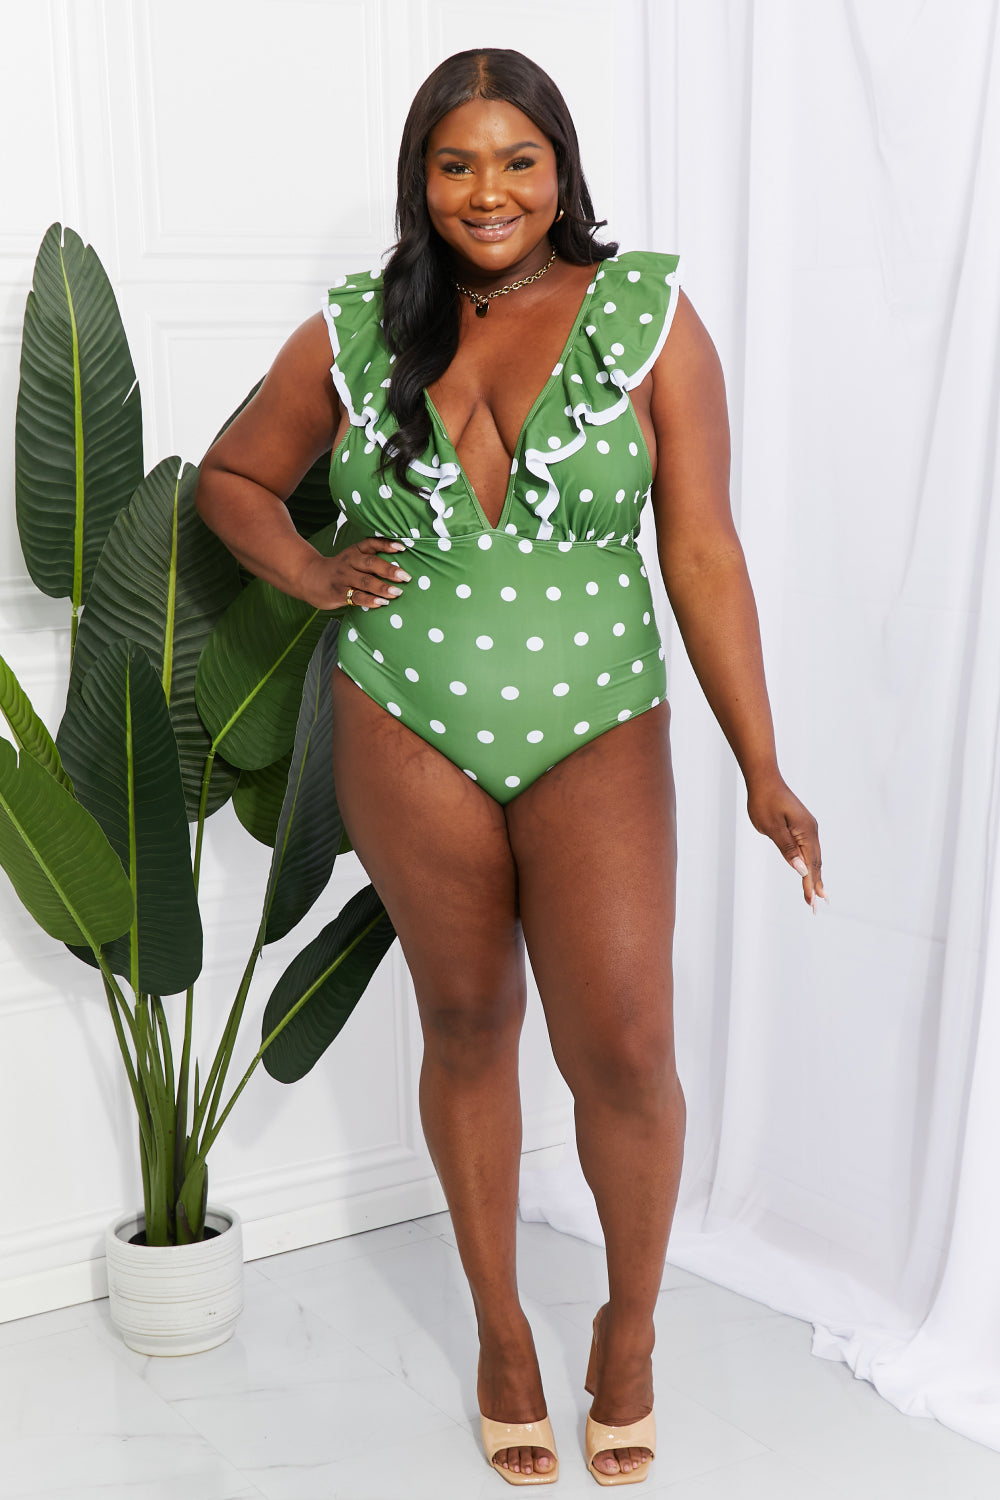 Make your inner beach babe shine by wearing a suit that makes you feel confident. This one is designed with a deep neckline and a ruffle trim. You can get double the use of this swimsuit by styling it as a bodysuit under a skirt or pair of jeans. Note: Runs small, order one size up. If between sizes or have a long torso, please size up.